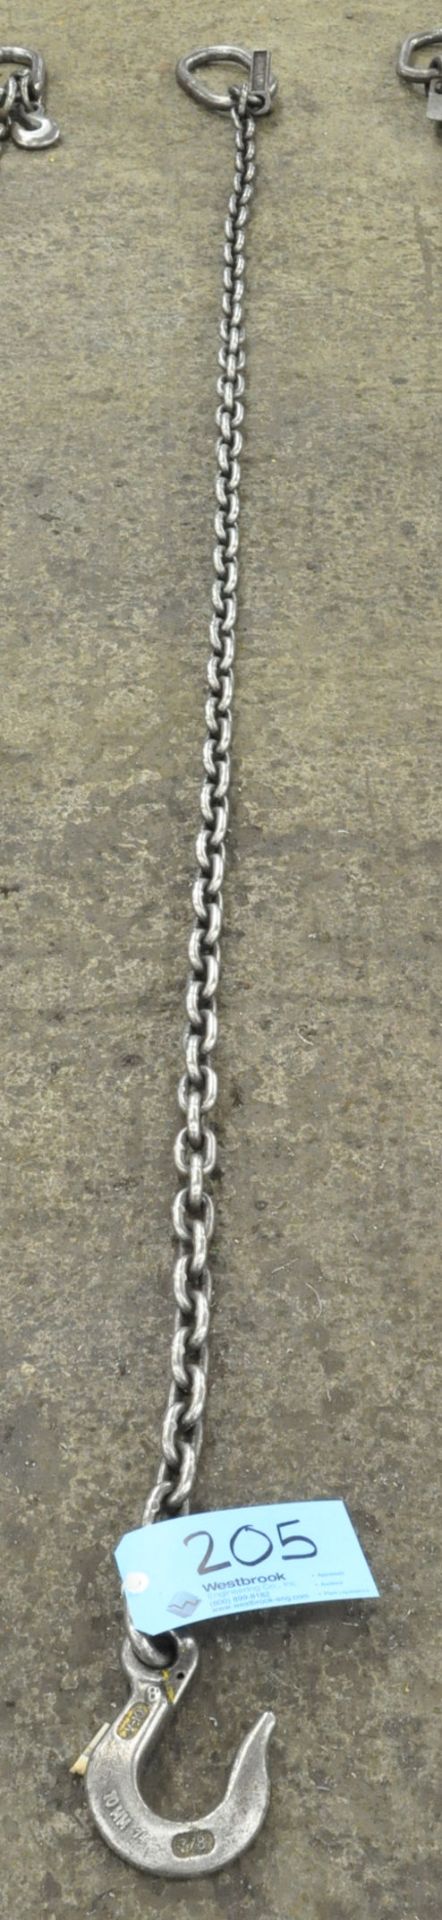 3/8" Link x 8' 7,100-Pound Capacity Single Hook Chain Sling with